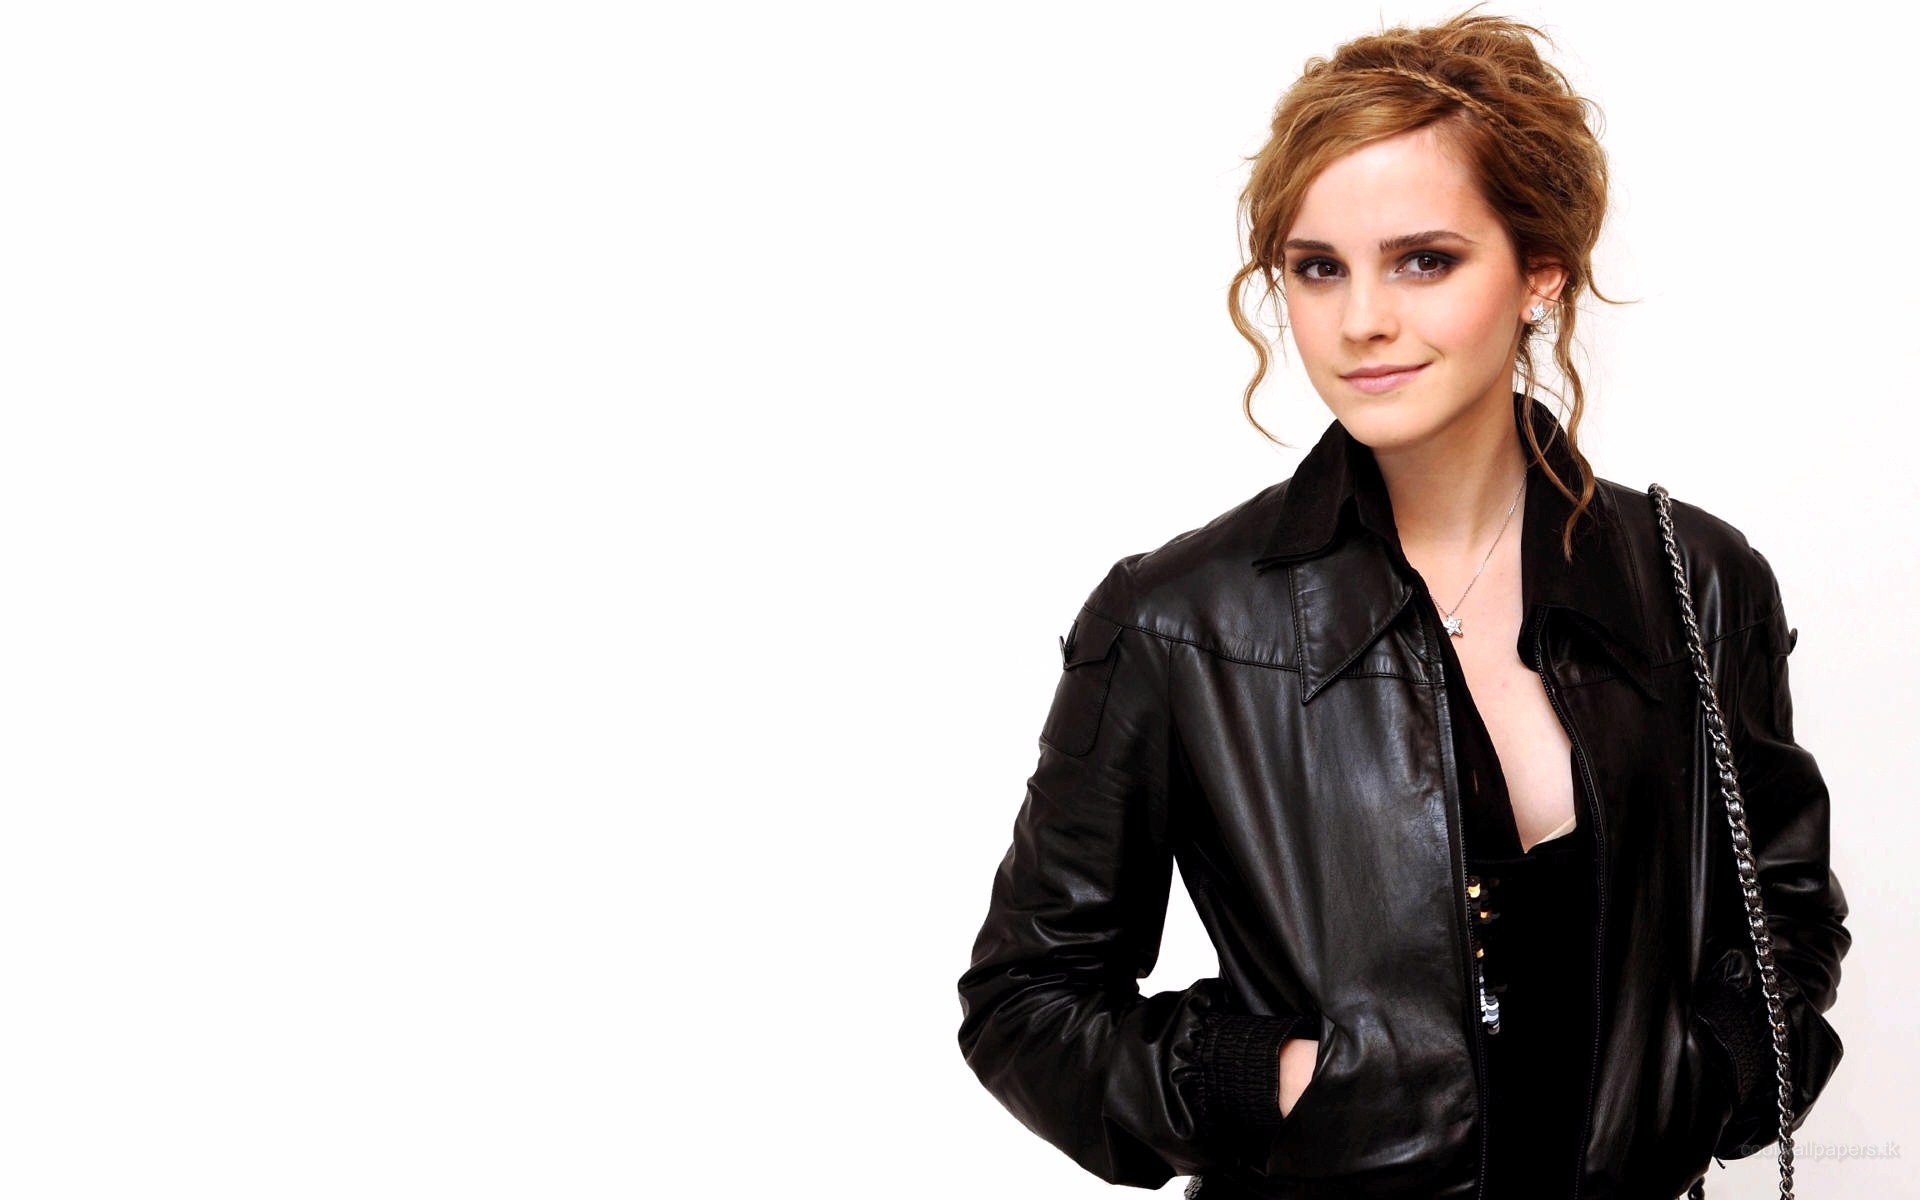 Wallpaper - Actress In Leather Jacket , HD Wallpaper & Backgrounds